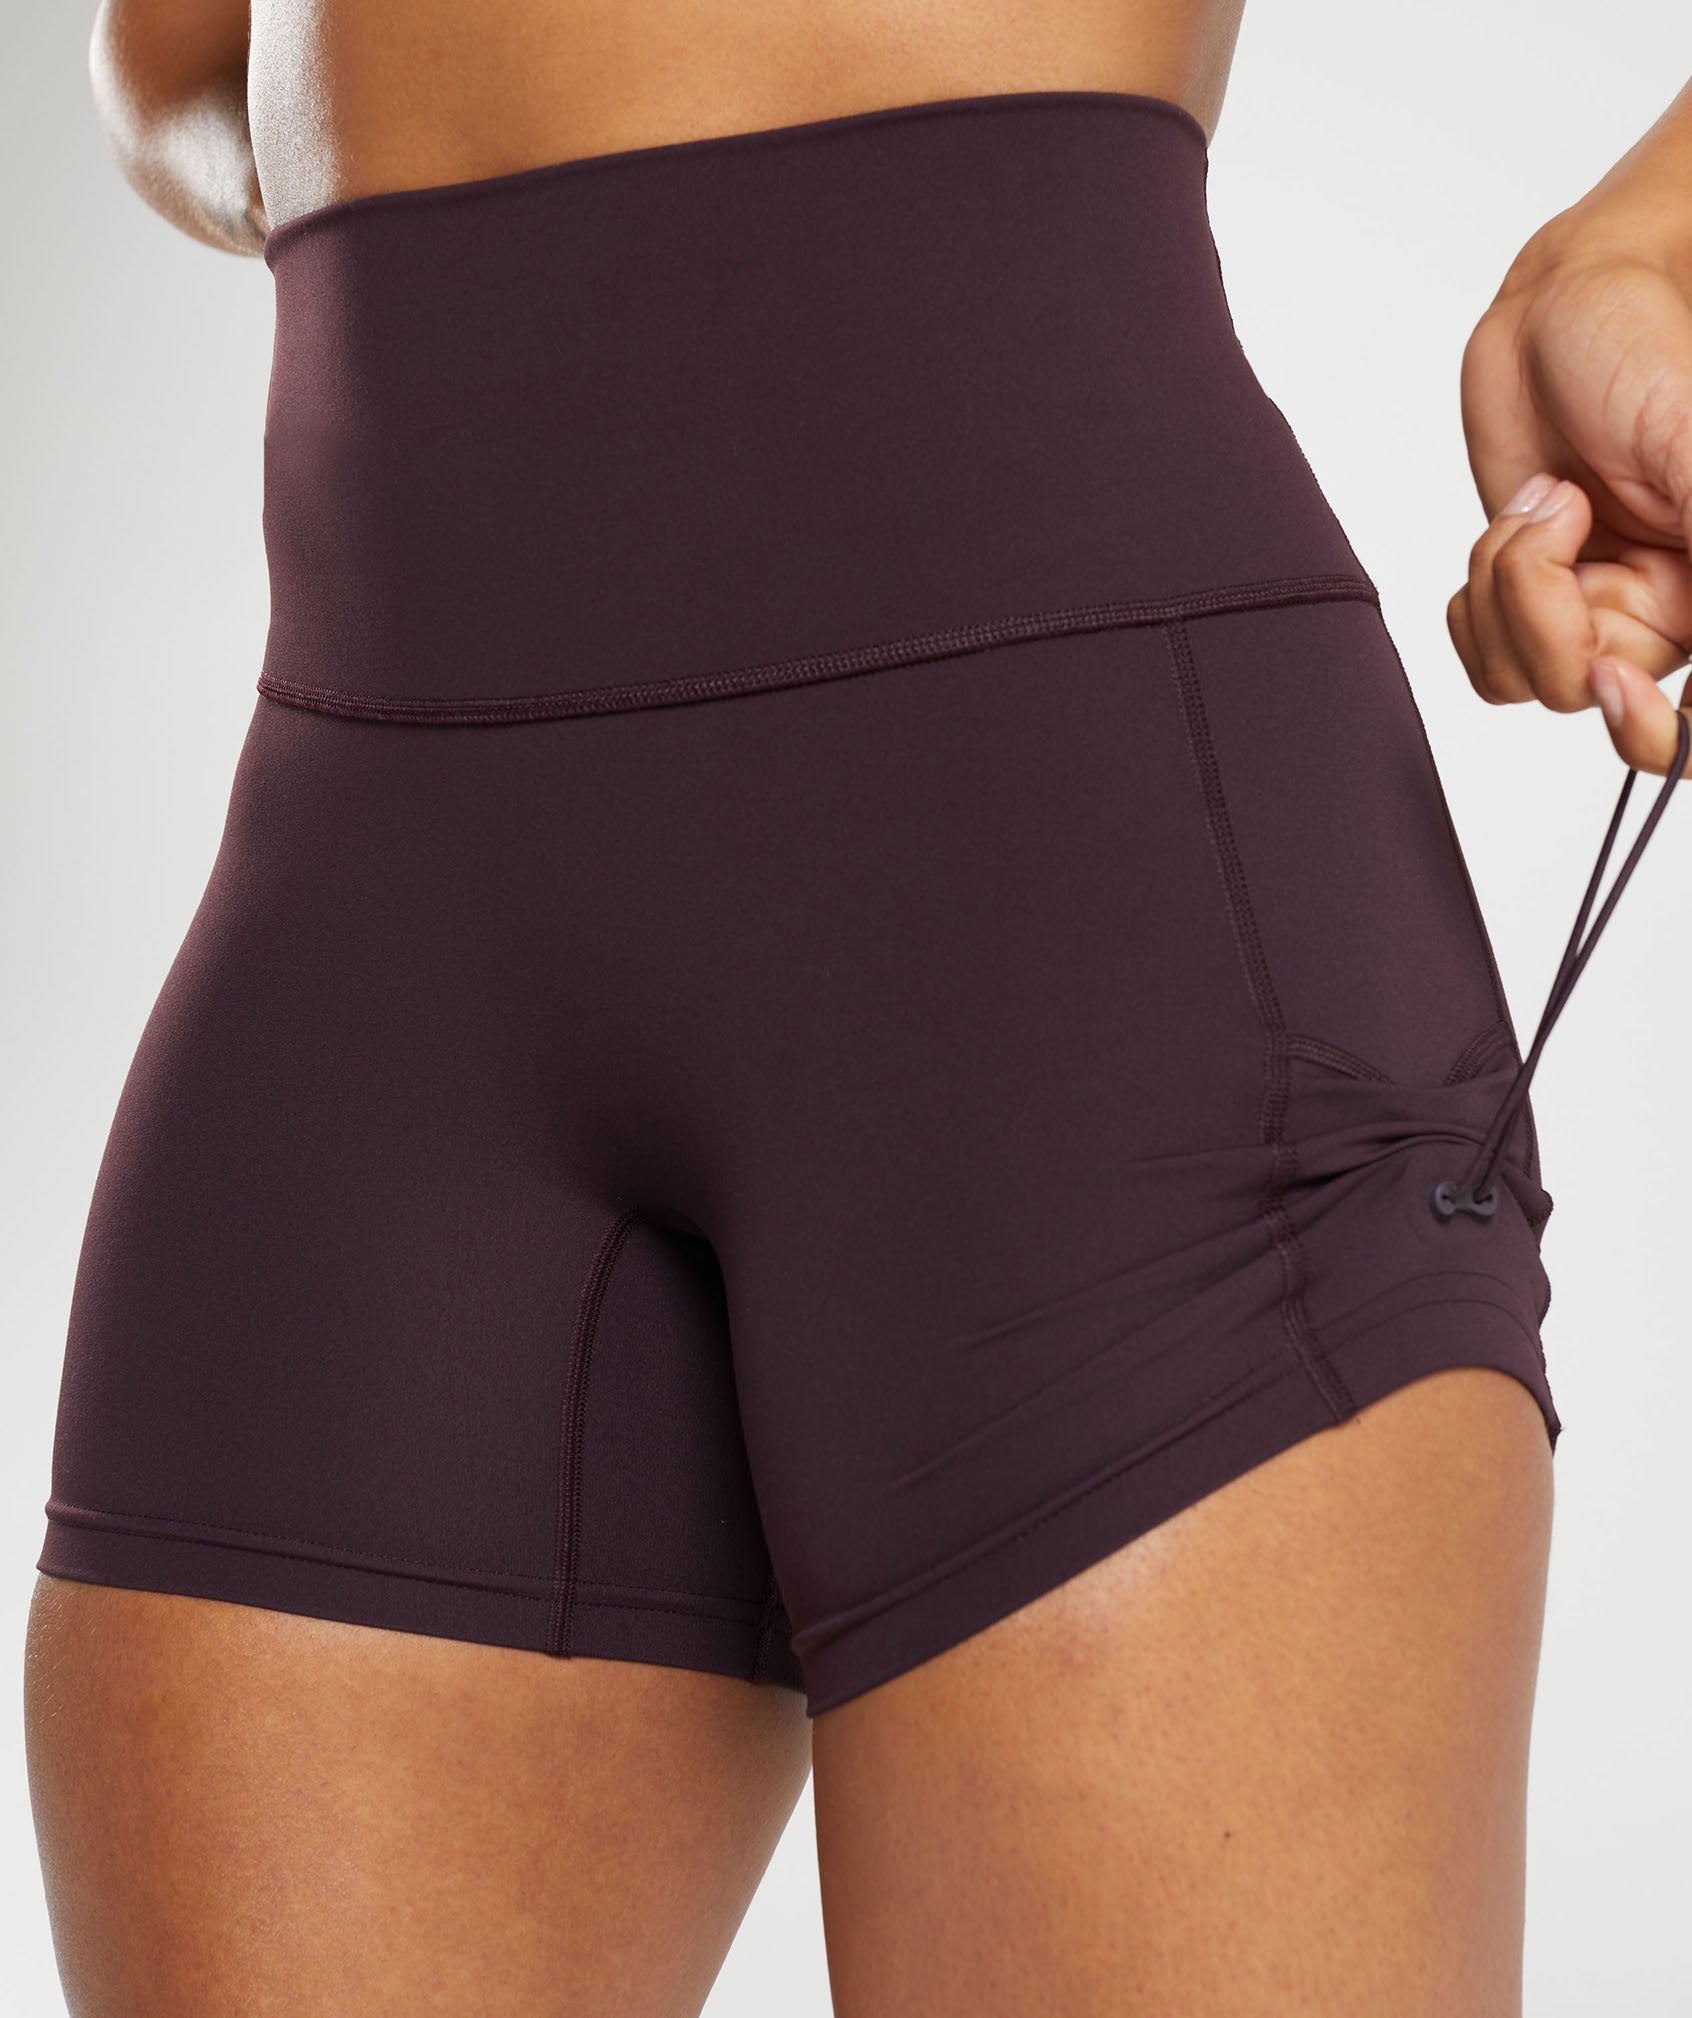 Legacy Tight Shorts in Plum Brown - view 6